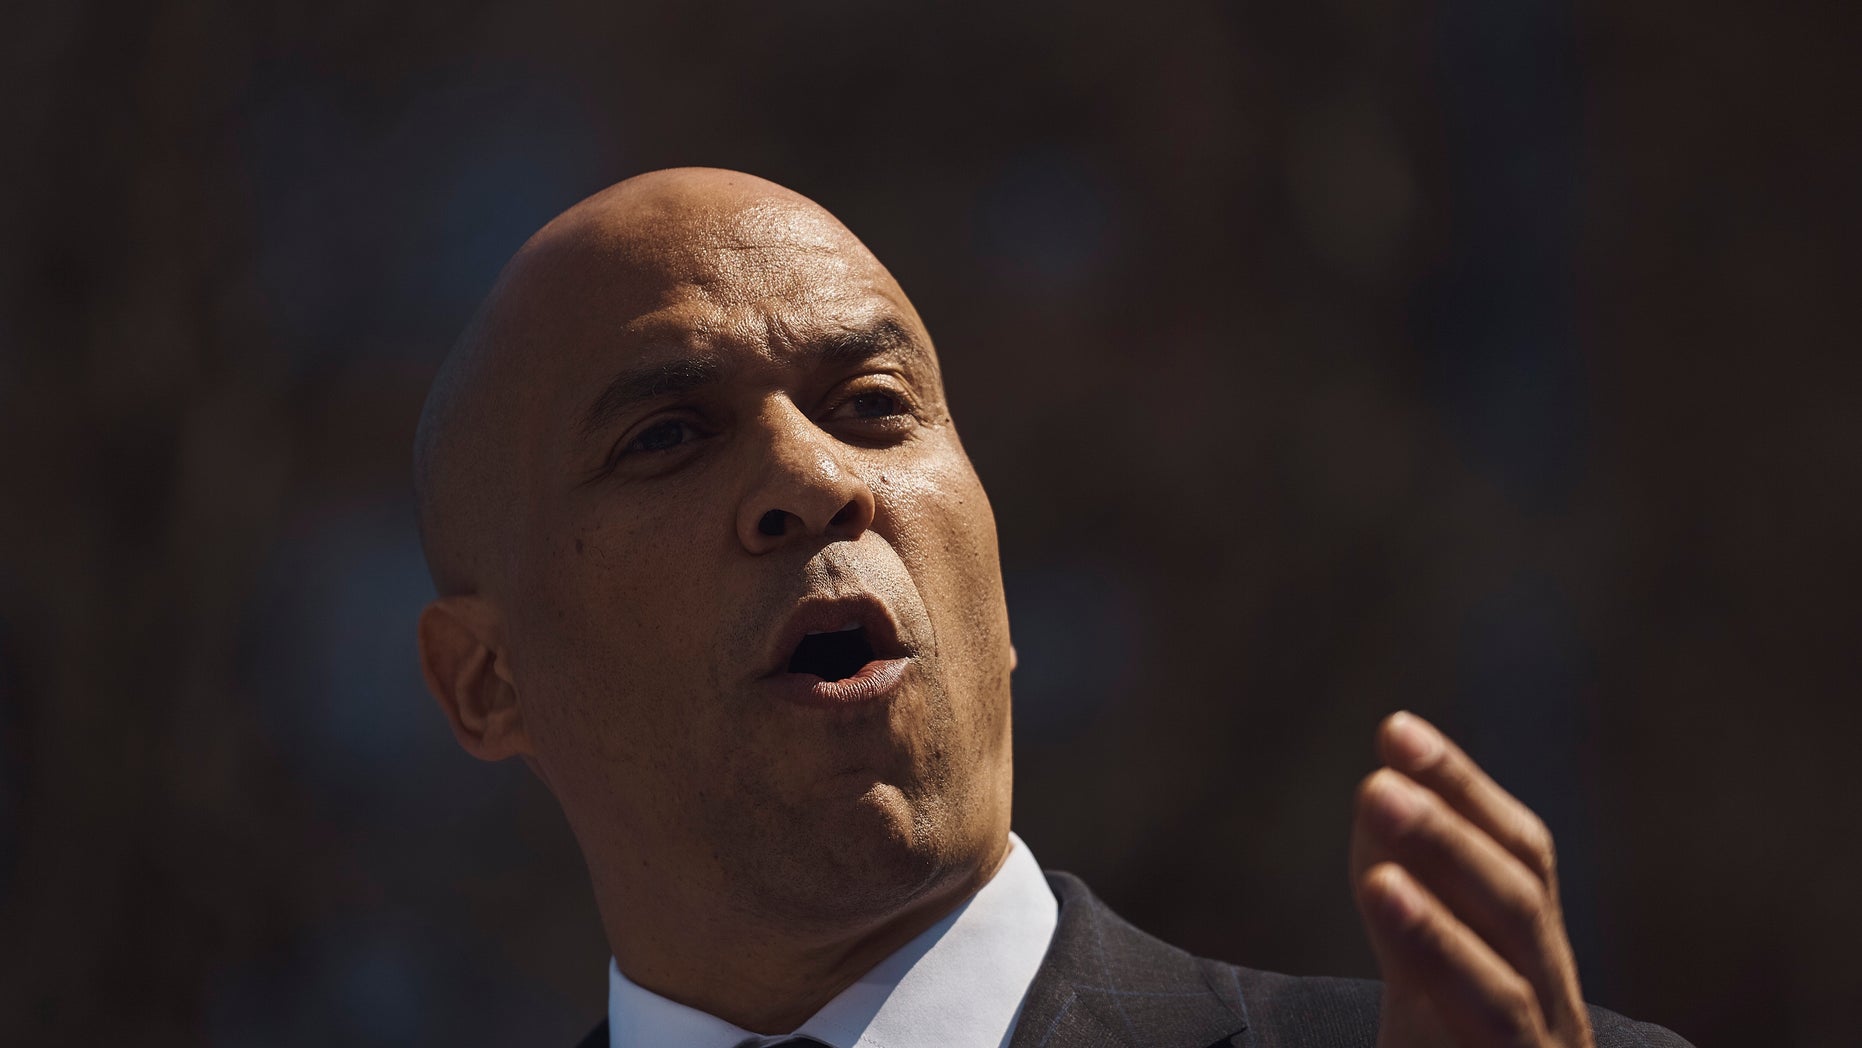 Democratic presidential candidate Senator Cory Booker, DN.J., will speak to the crowd at the opening shot of his hometown for his National Presidential Campaign Tour at Military Park in downtown Newark on Saturday . (AP Photo / Andres Kudacki)